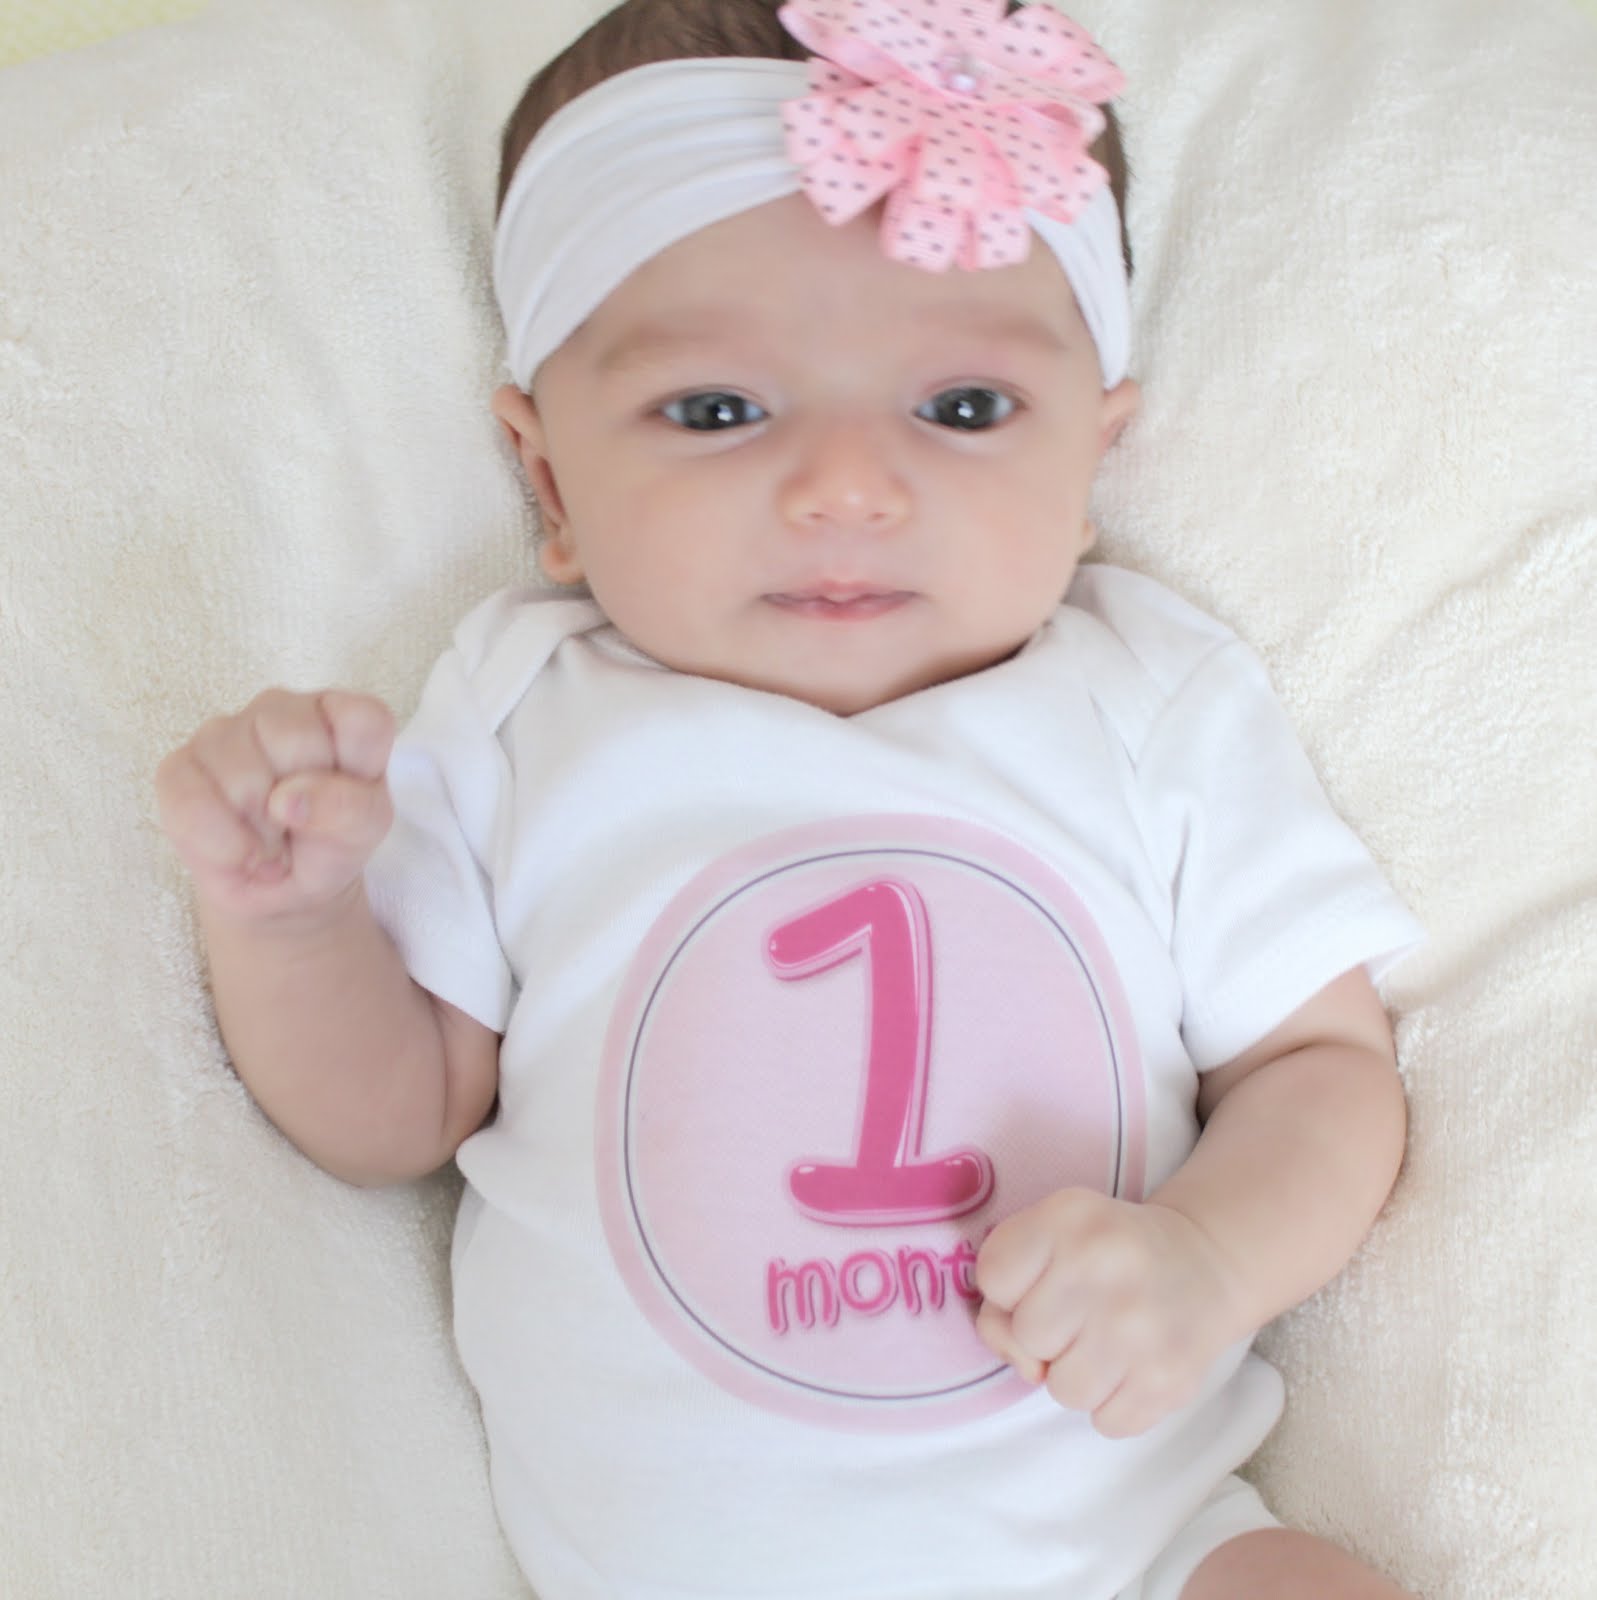 1 month old child